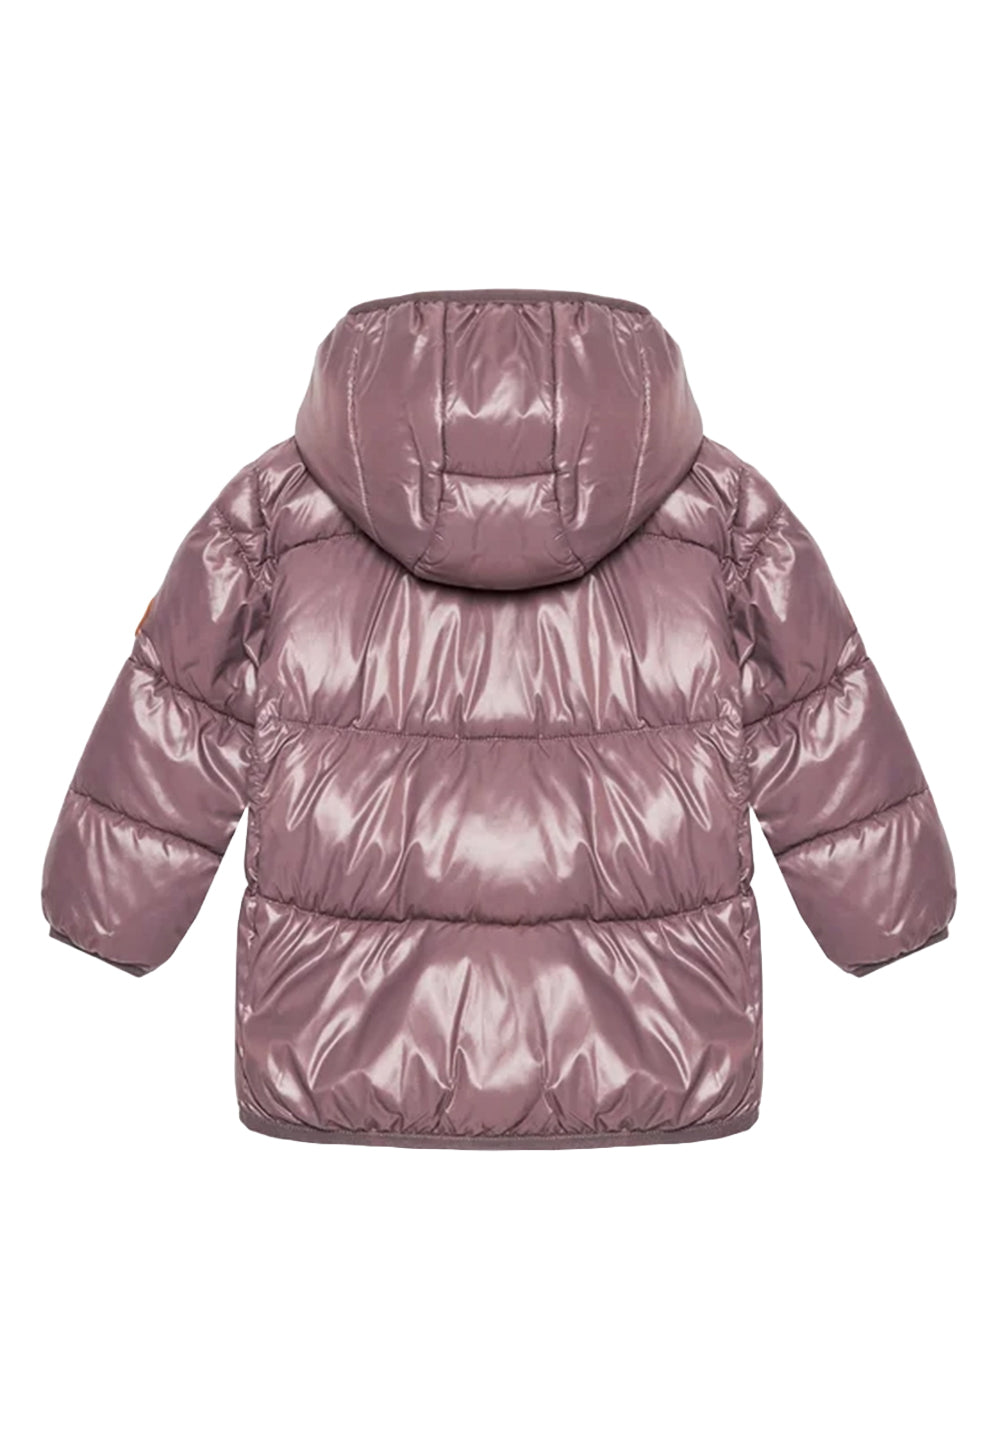 Pink jacket for baby girl